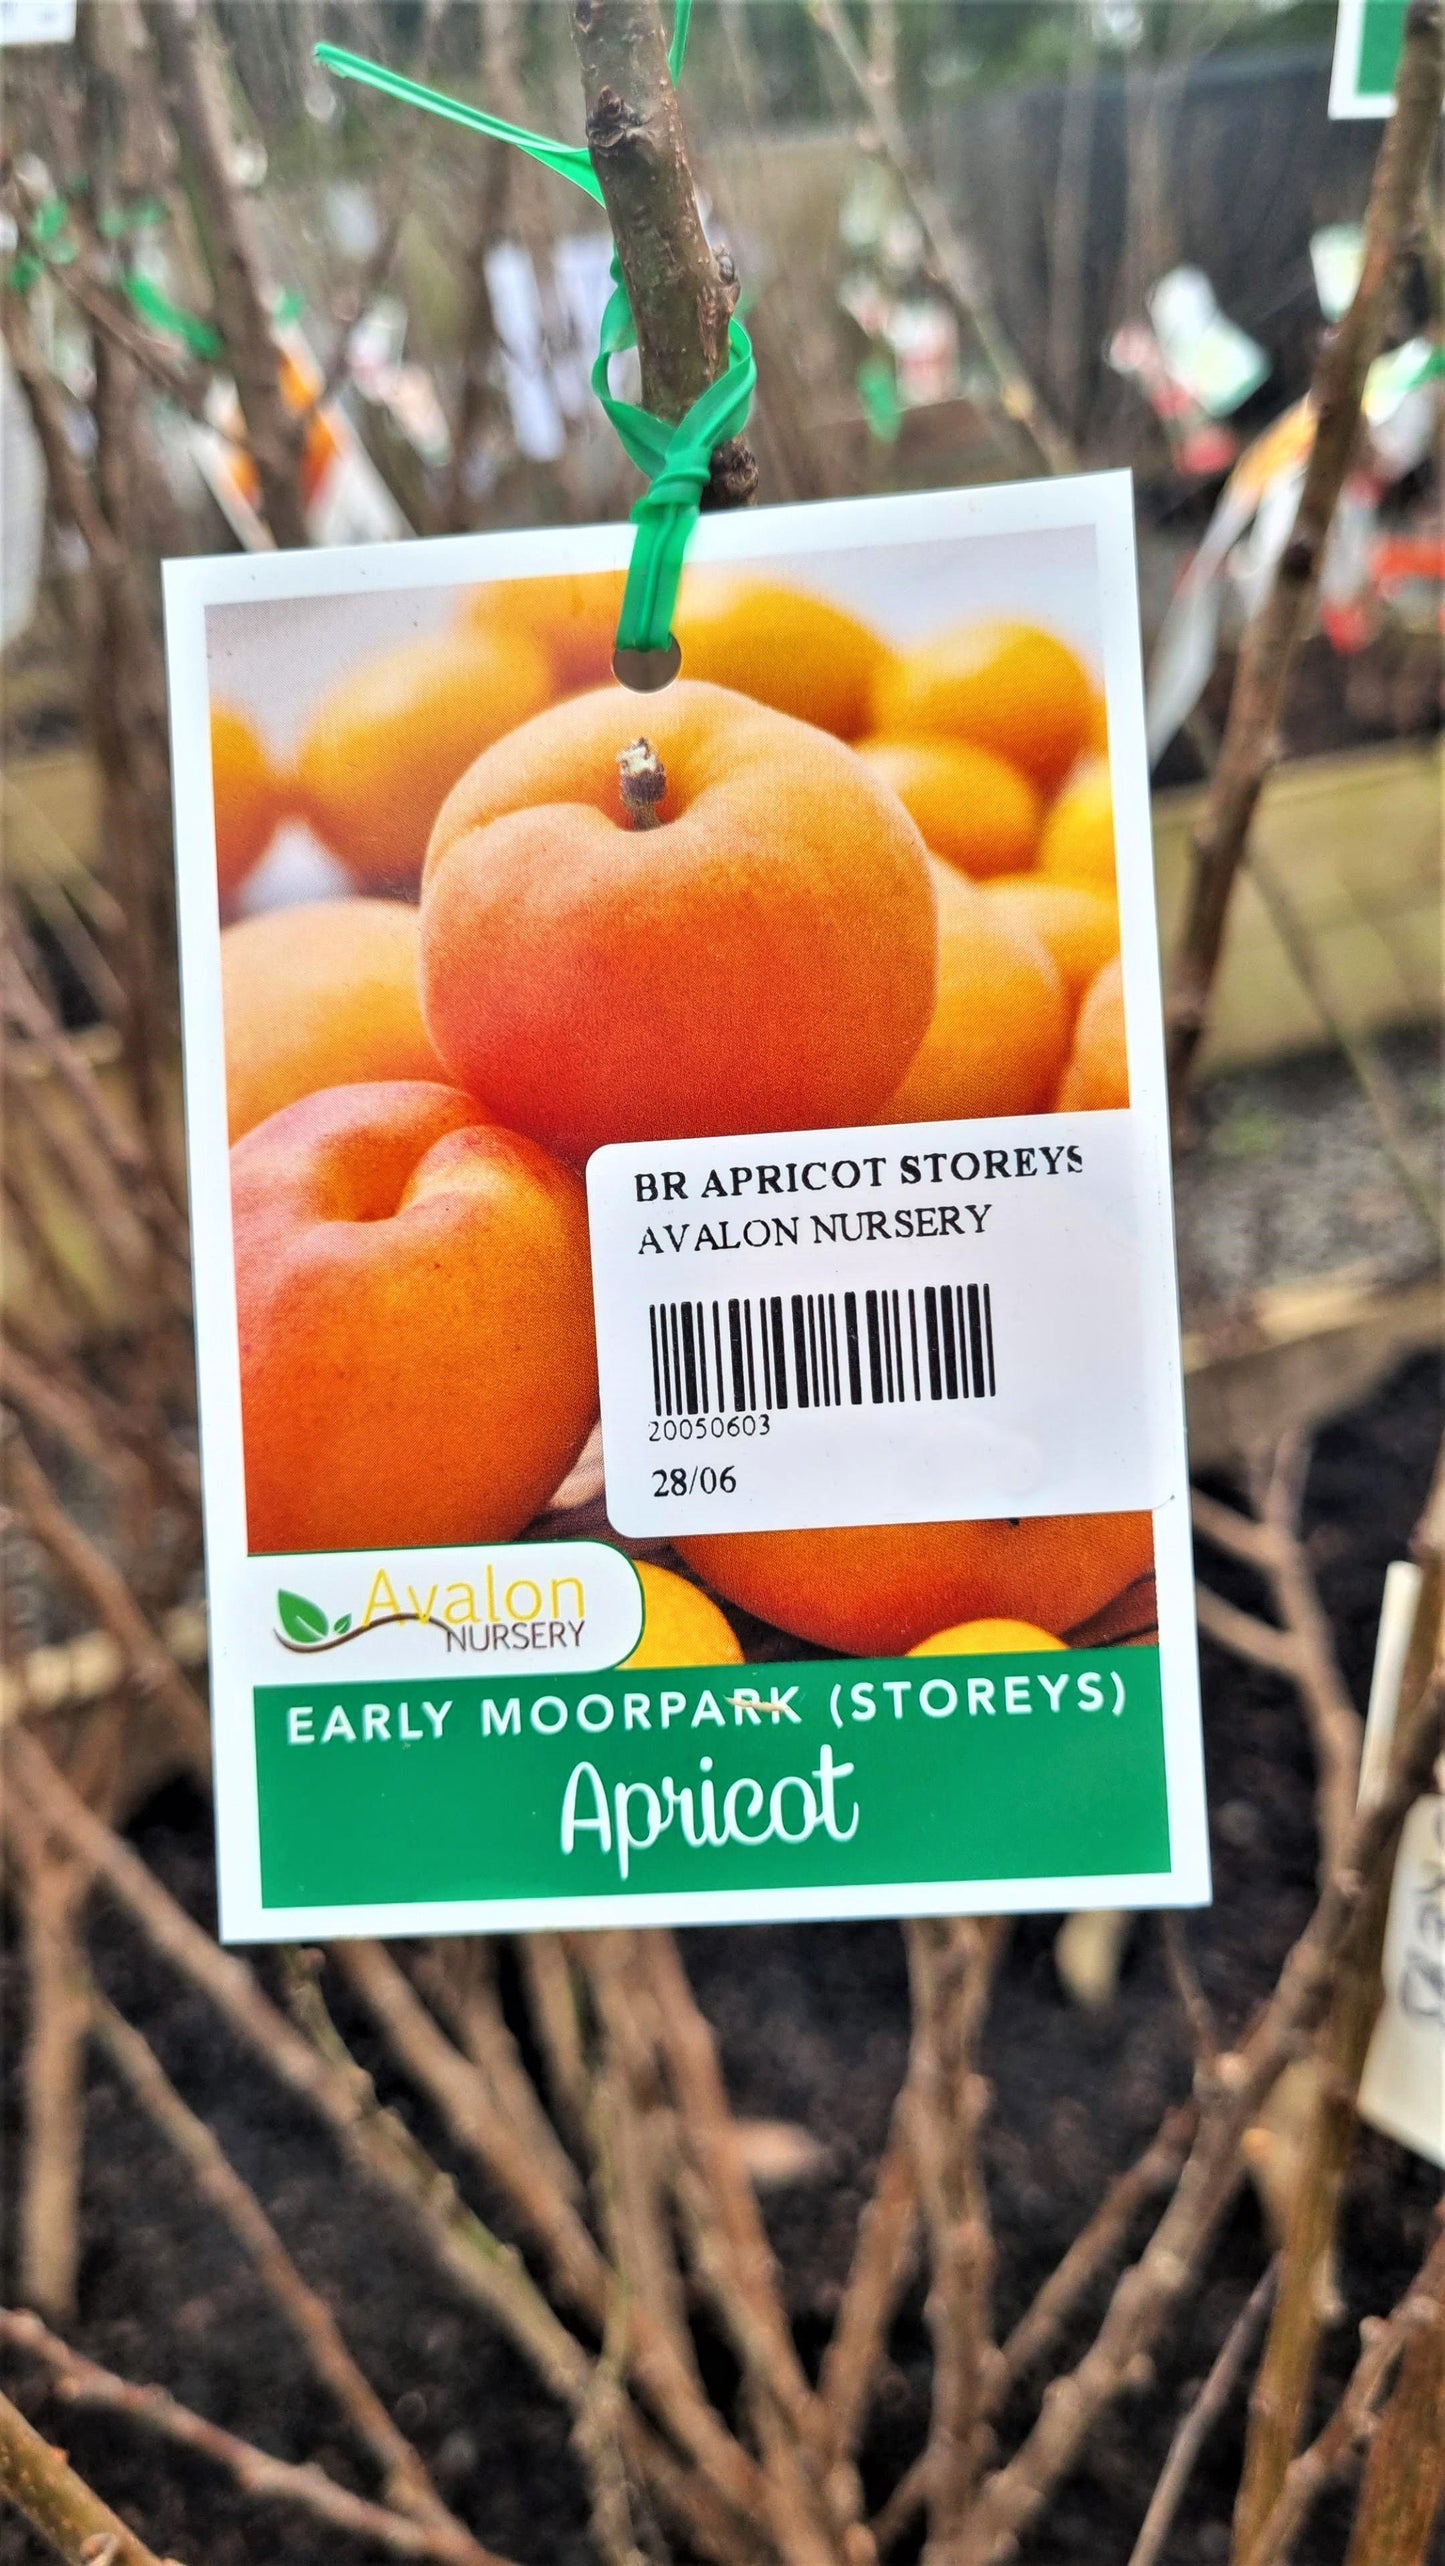 APRICOT STOREYS EARLY MOORPARK BR